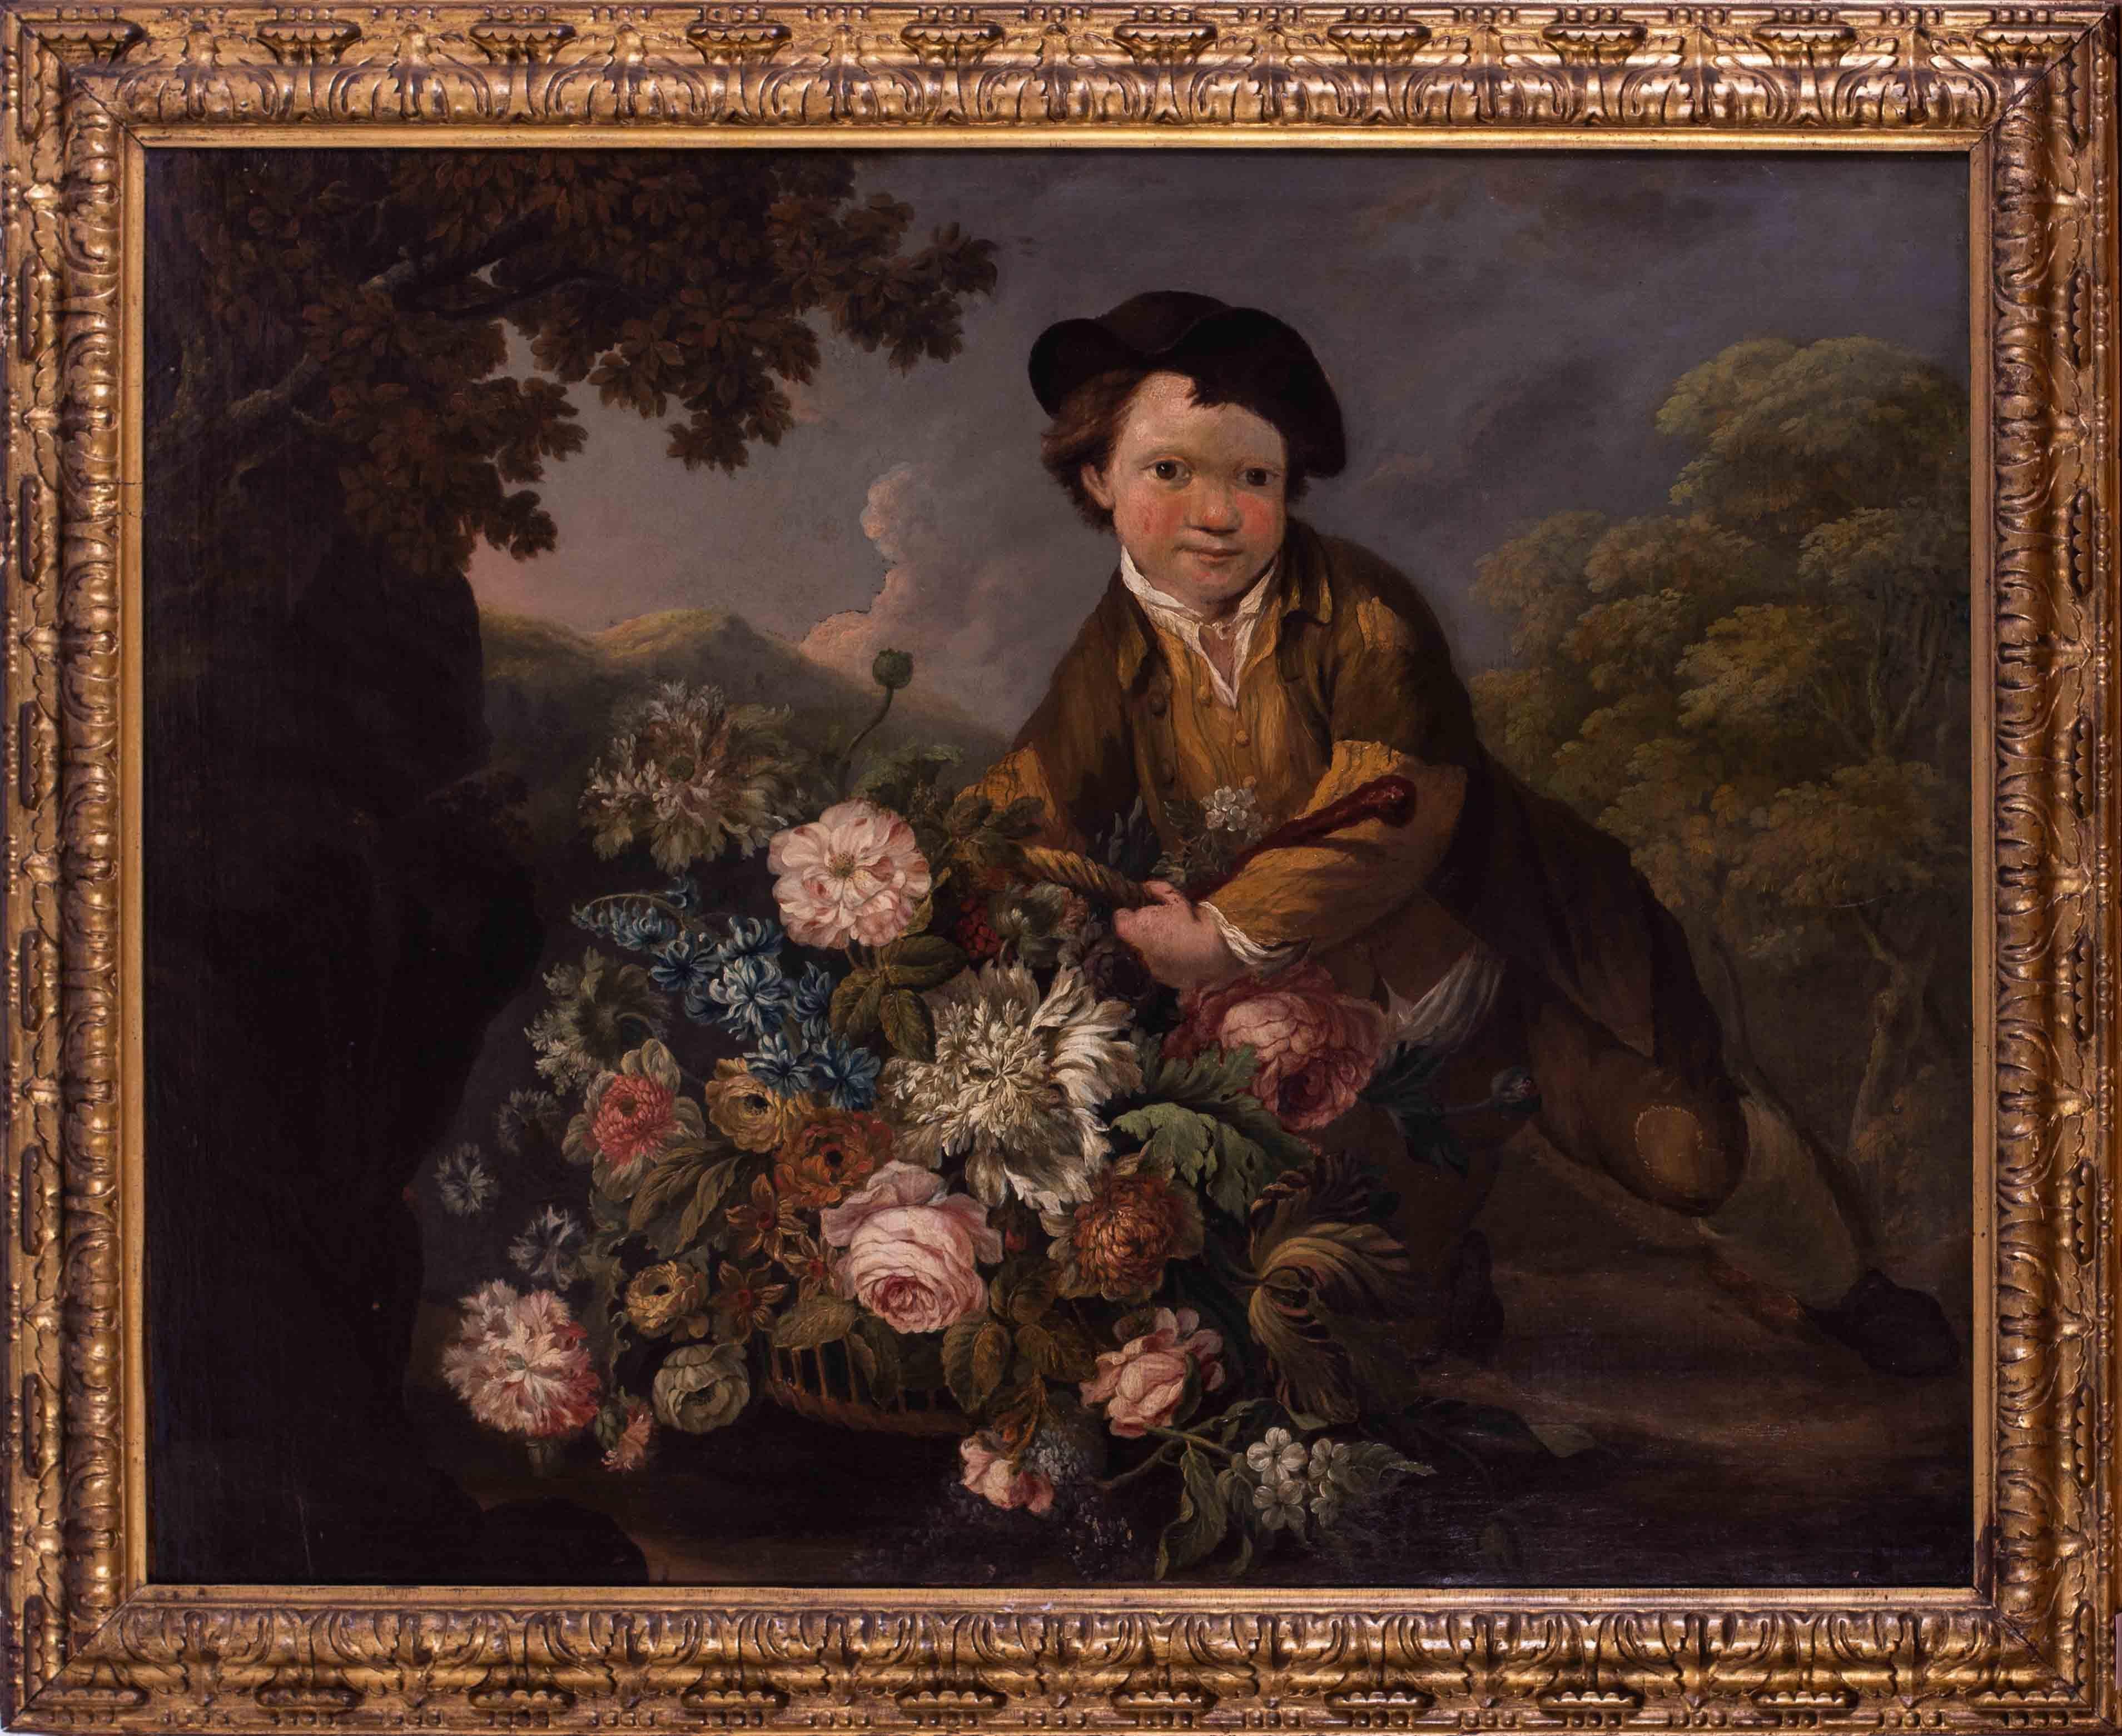 Unknown Figurative Painting - Dutch School, 18th Century, Boy with a basketful of flowers